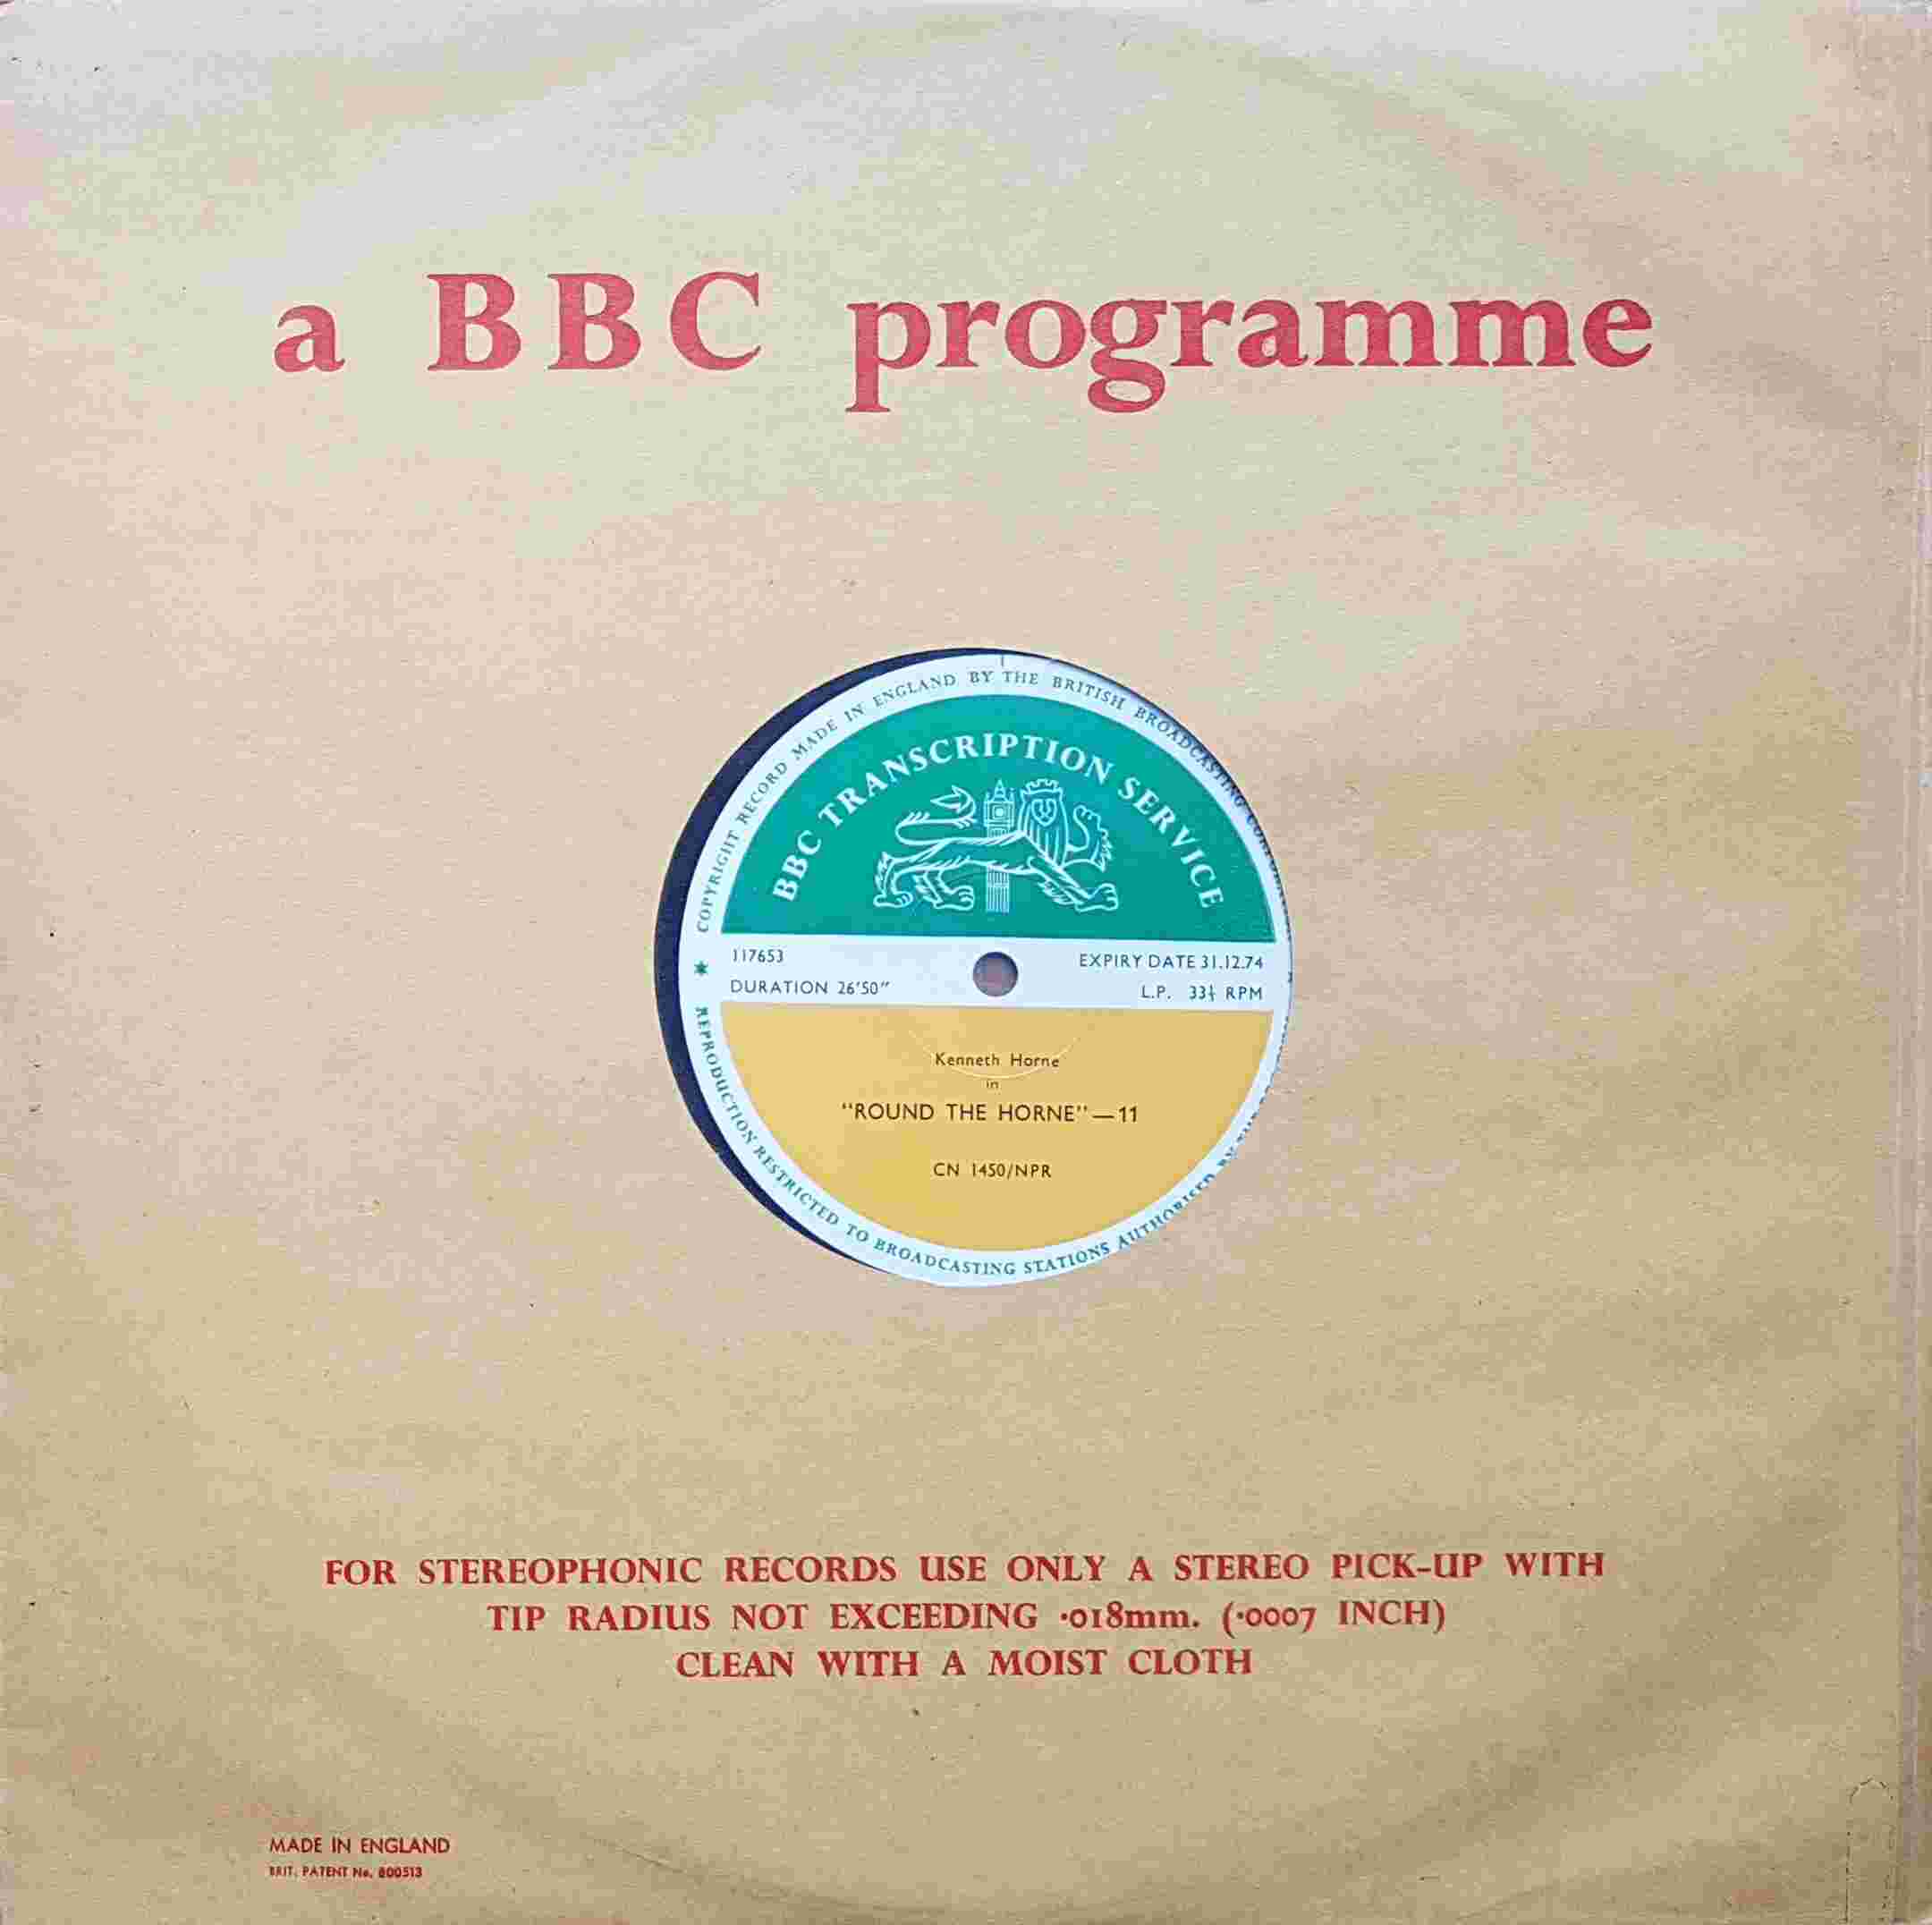 Picture of CN 1450 NPR 6 Round the Horne - 11 & 12 by artist Kenneth Horne from the BBC albums - Records and Tapes library